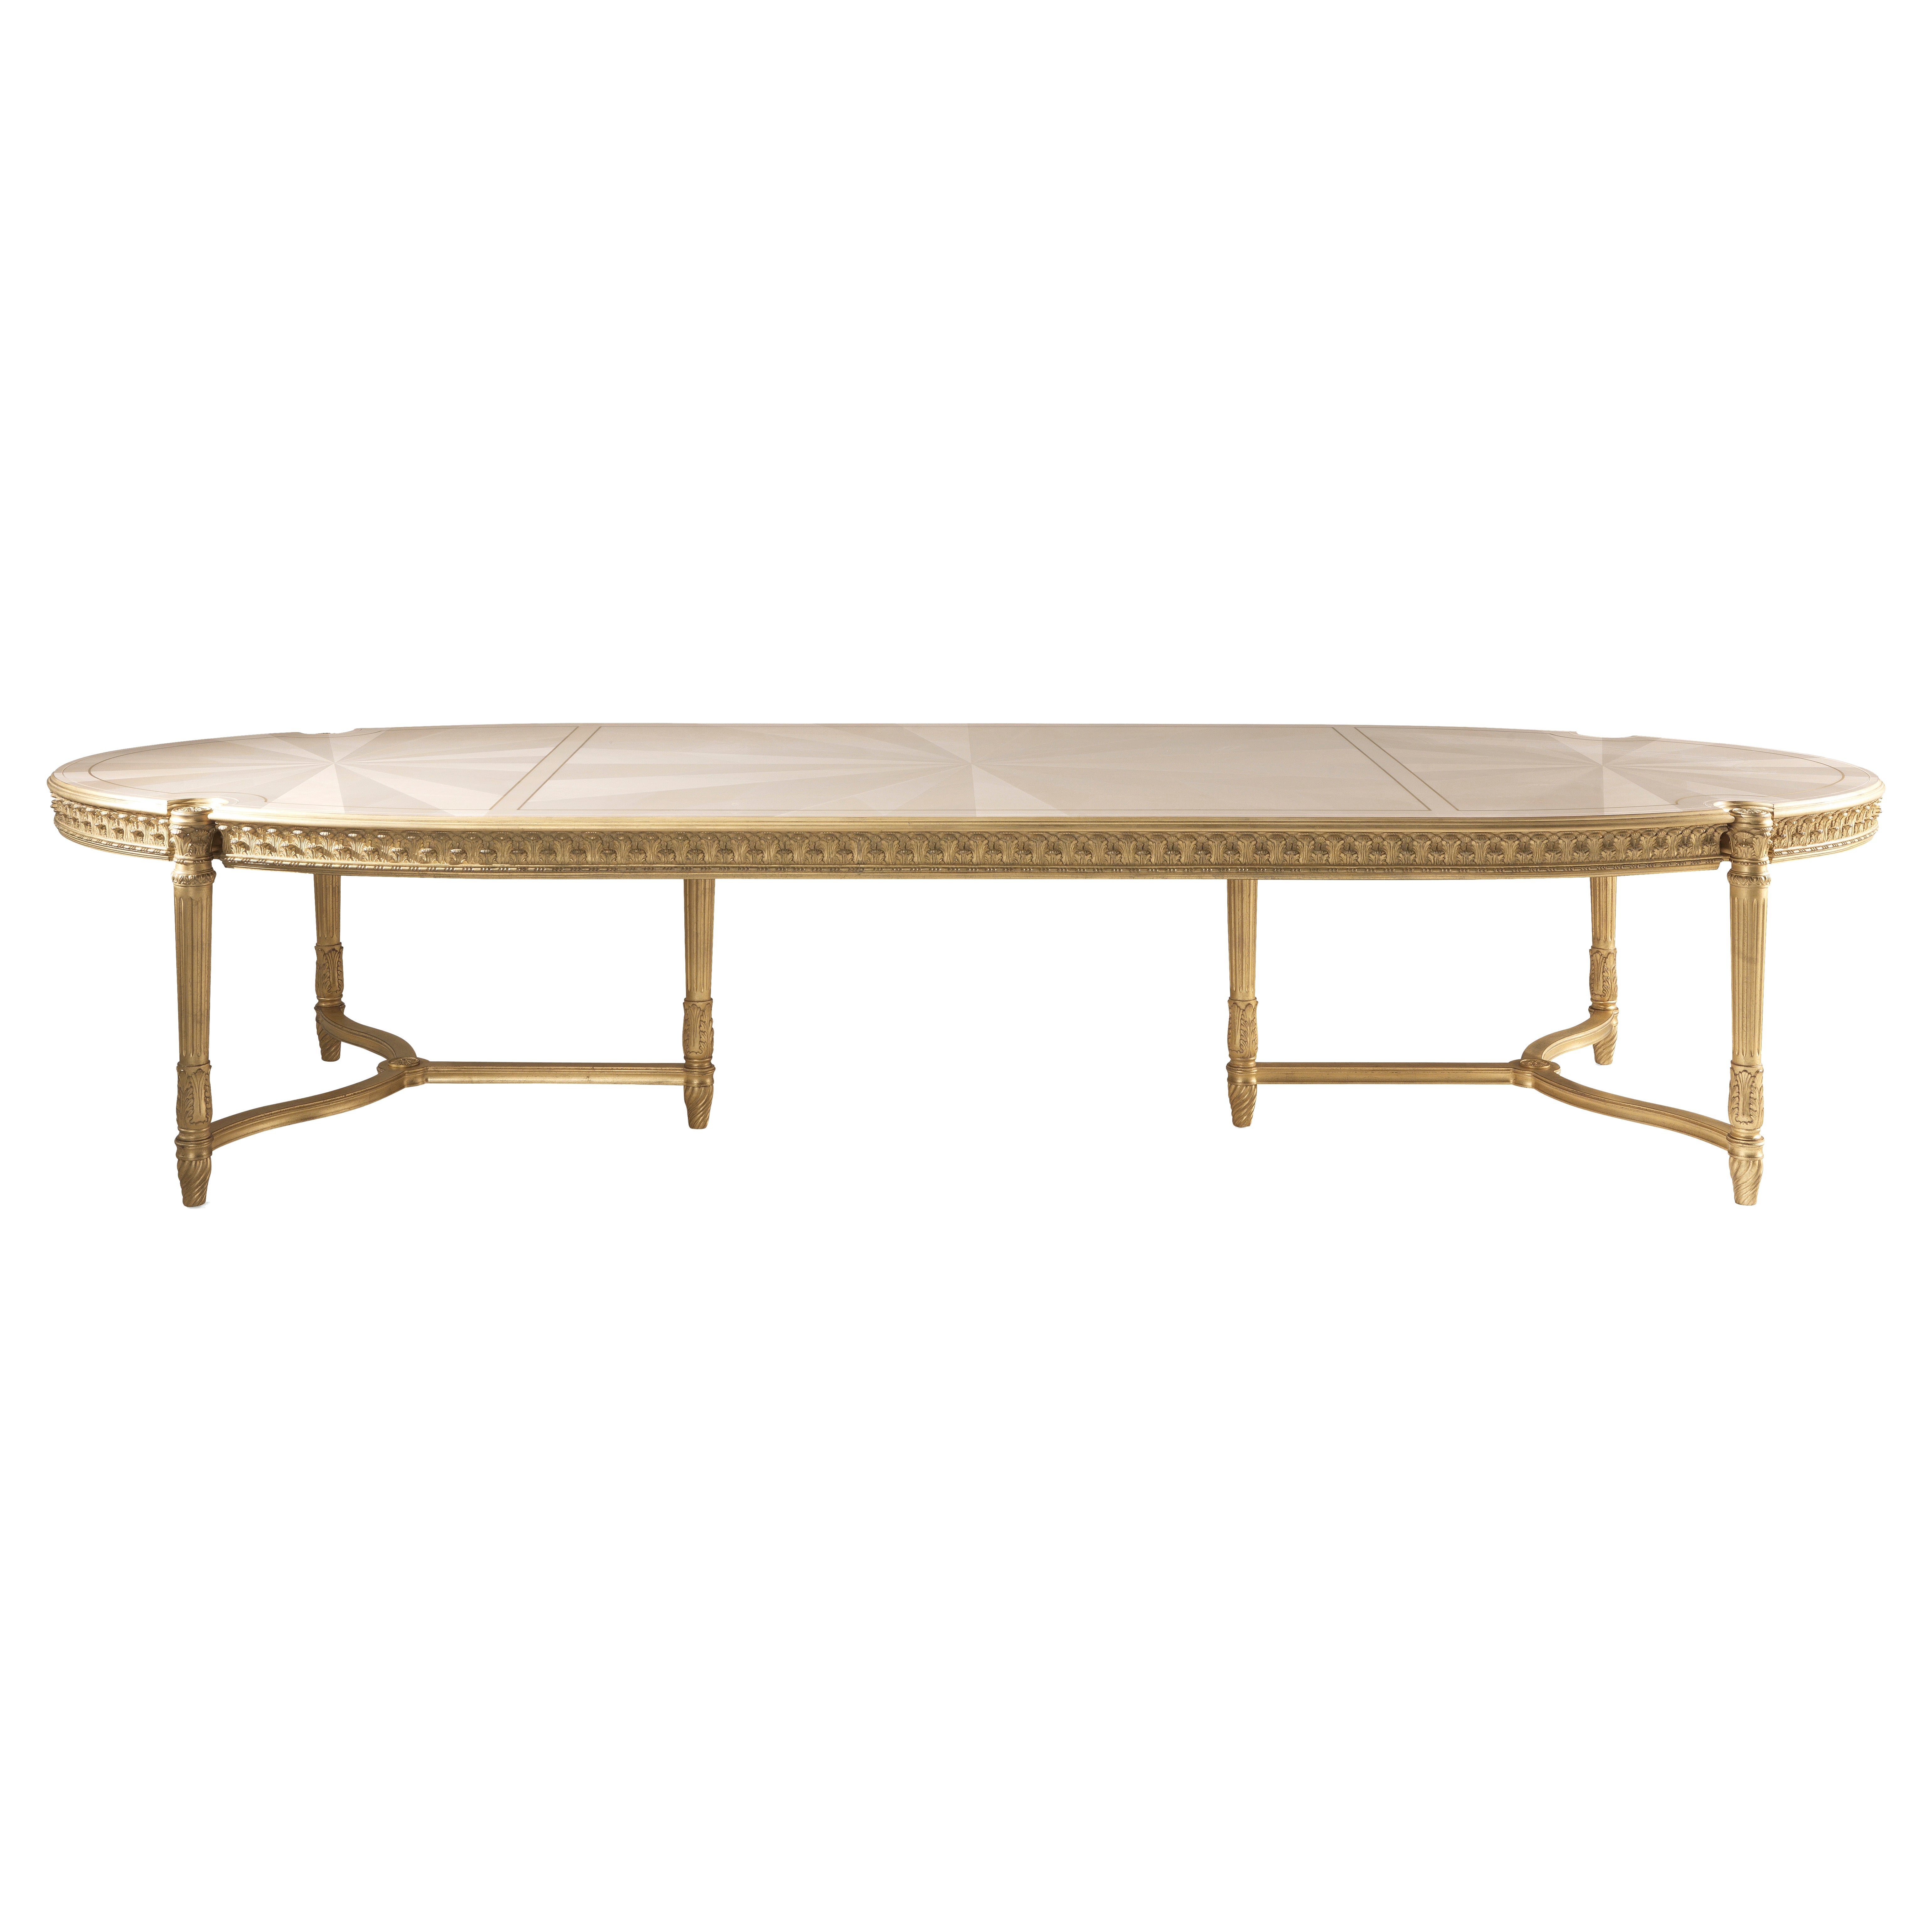 21st Century Boulevard Dining Table with Hand-carved Legs in style of Louis XVI For Sale